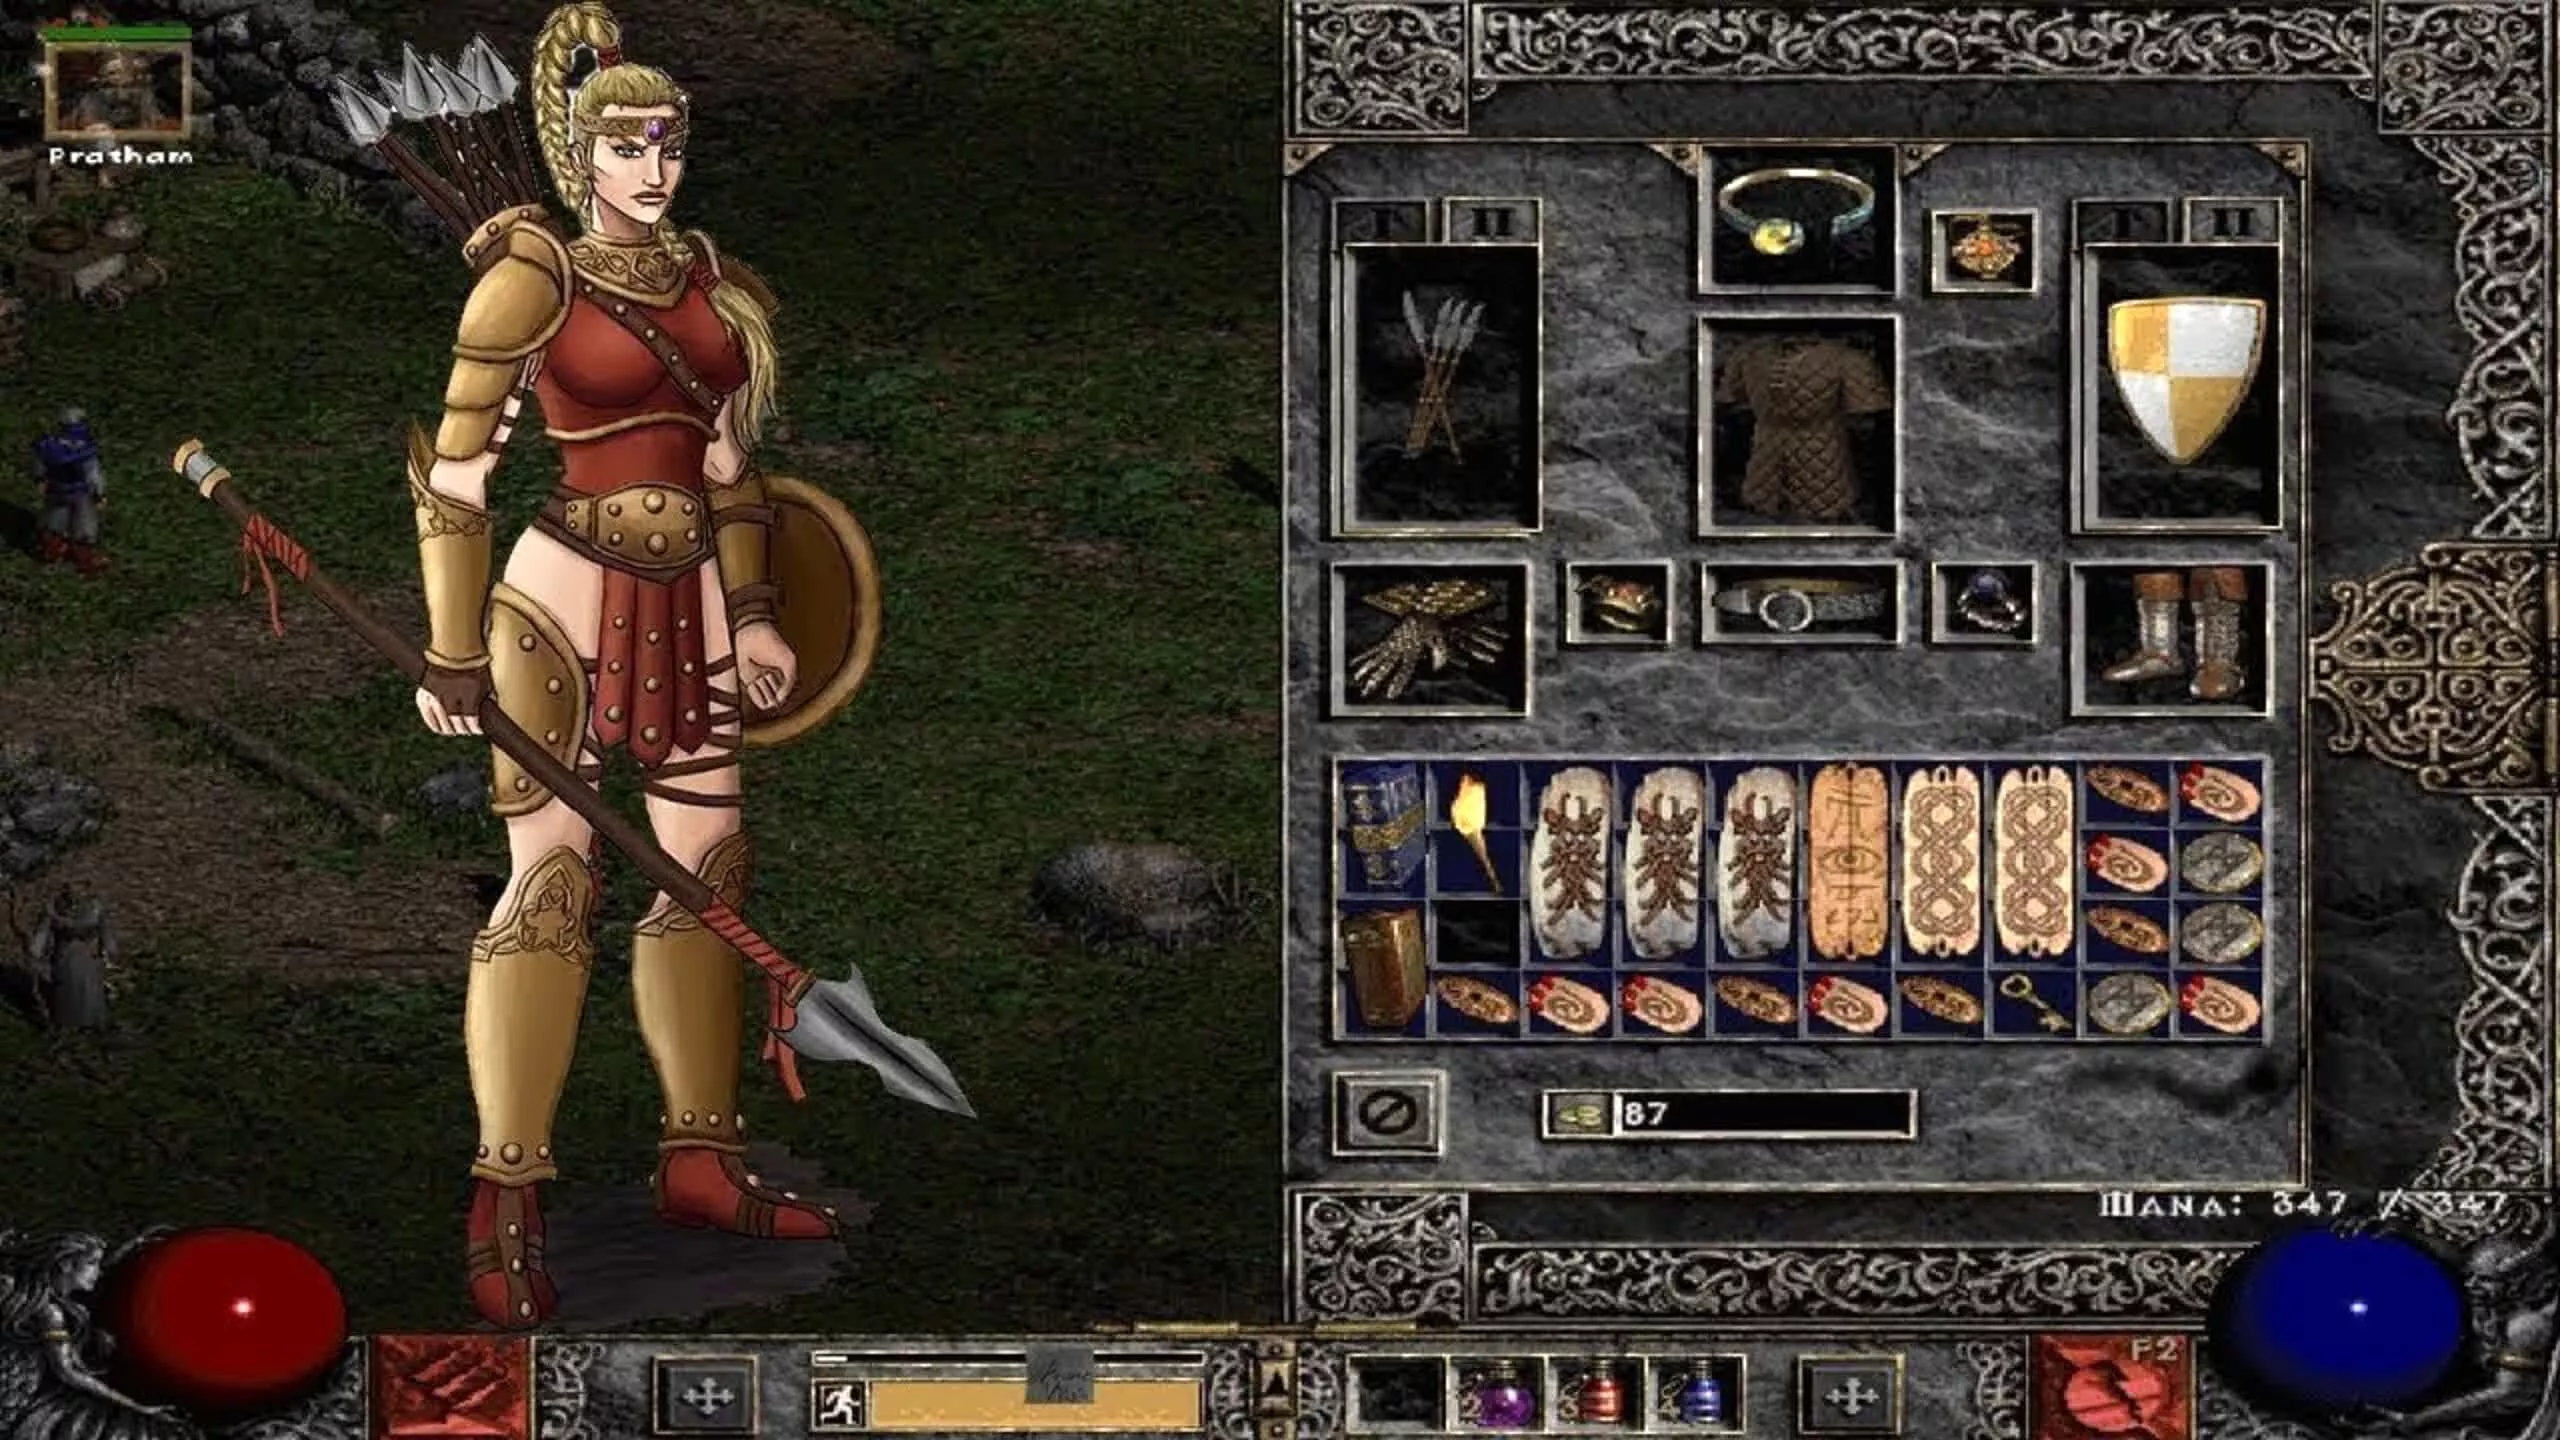 Diablo II: Resurrected will let you load the original game's save files